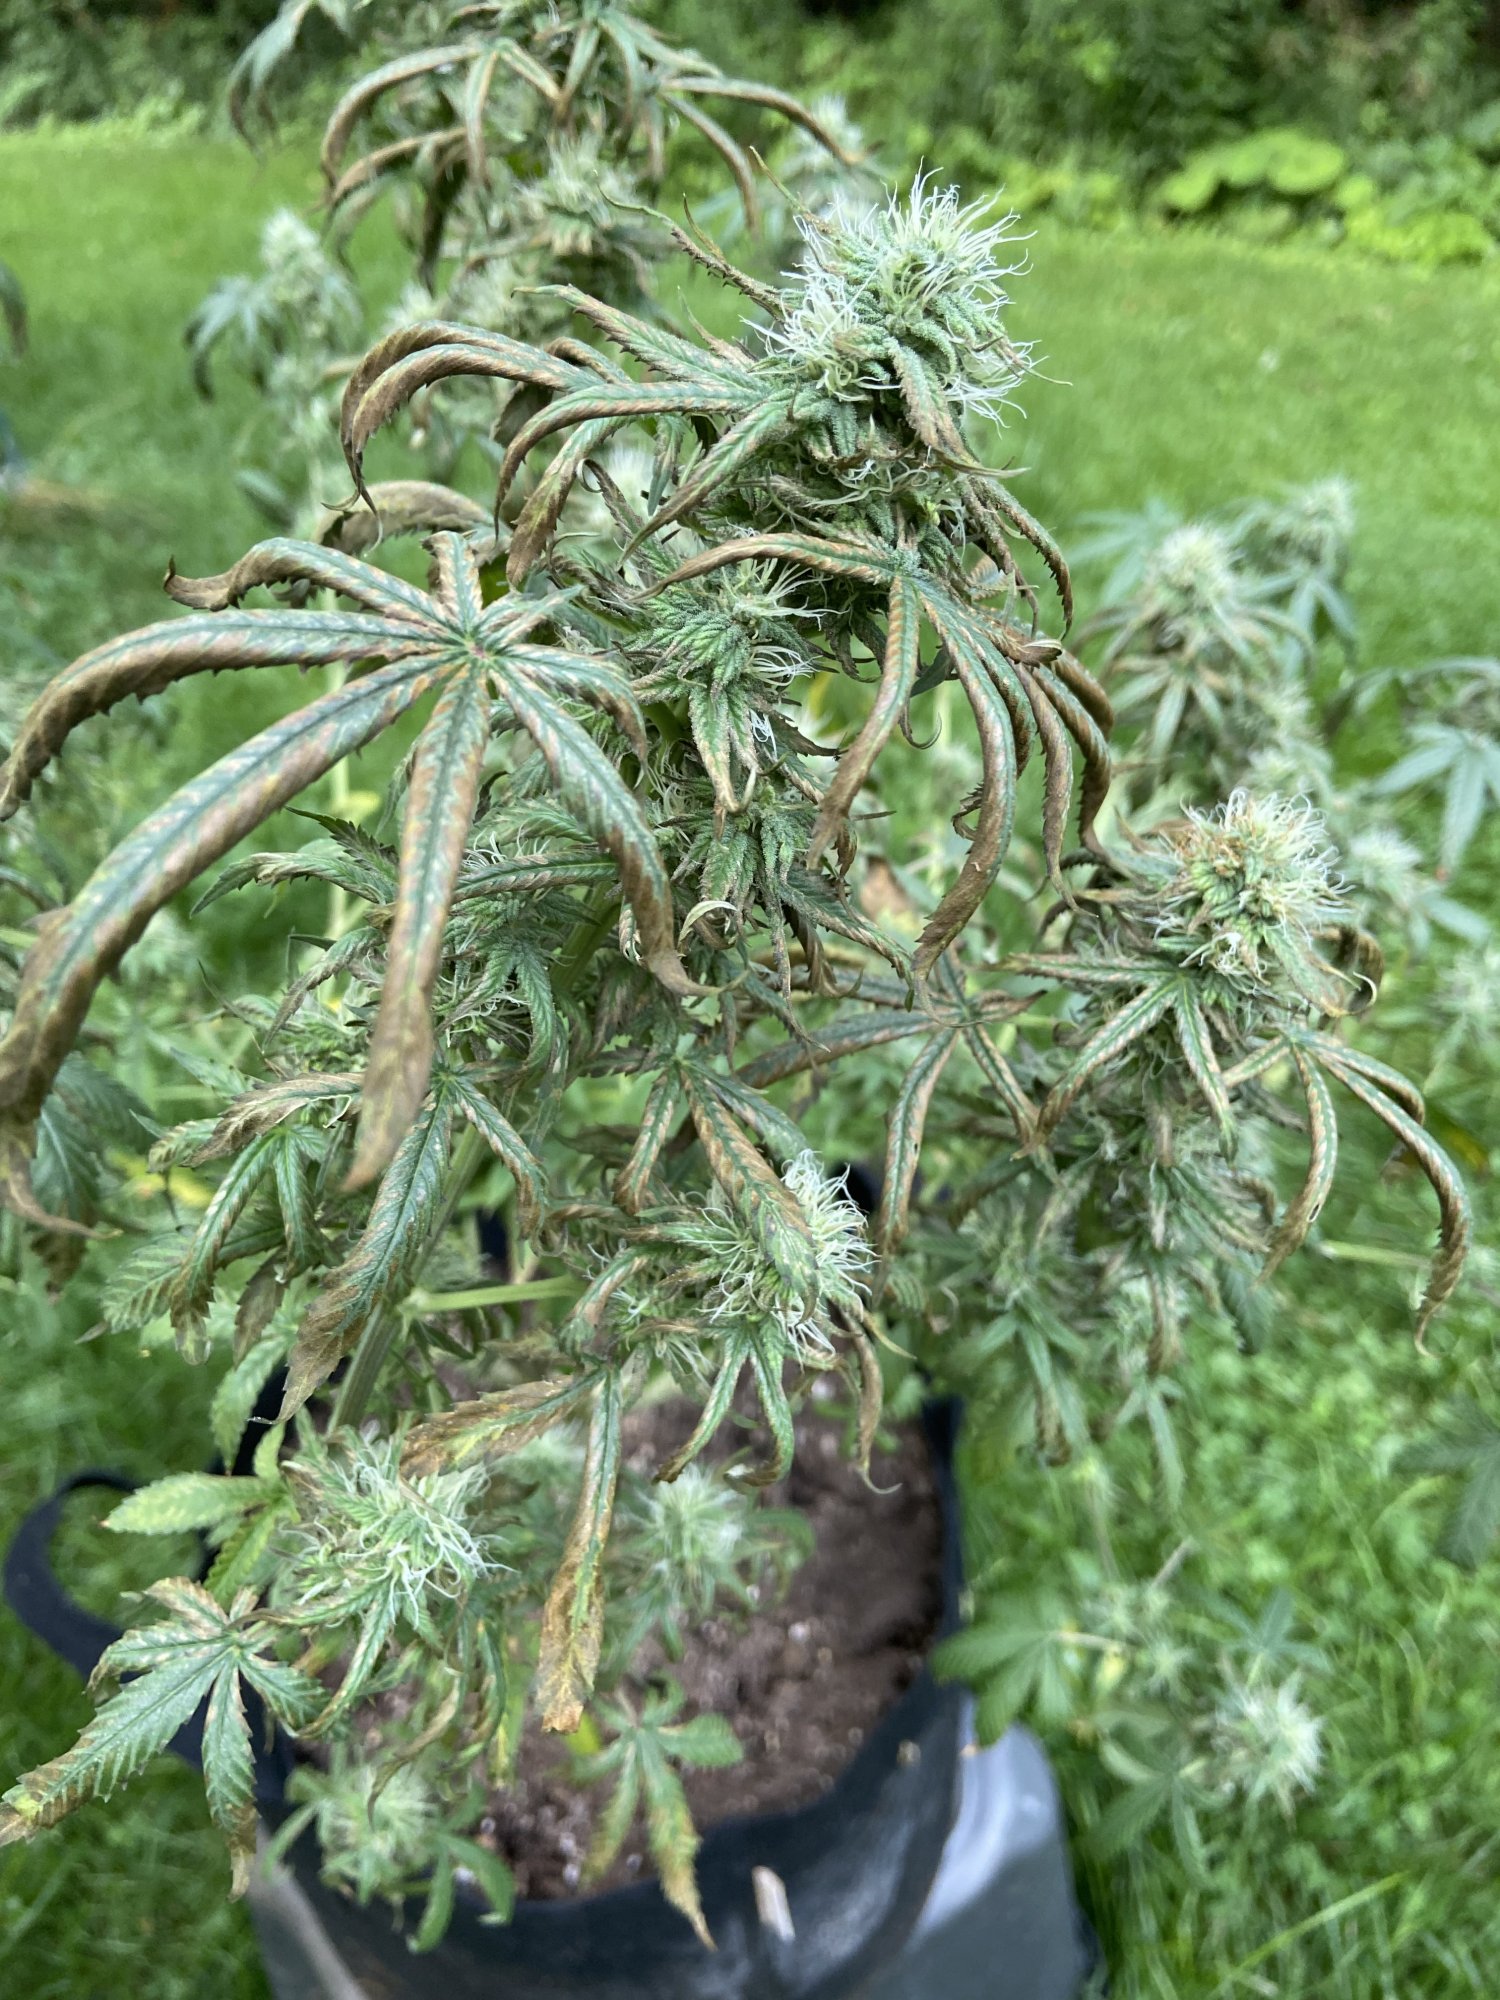 I need help with  my sour diesel 2